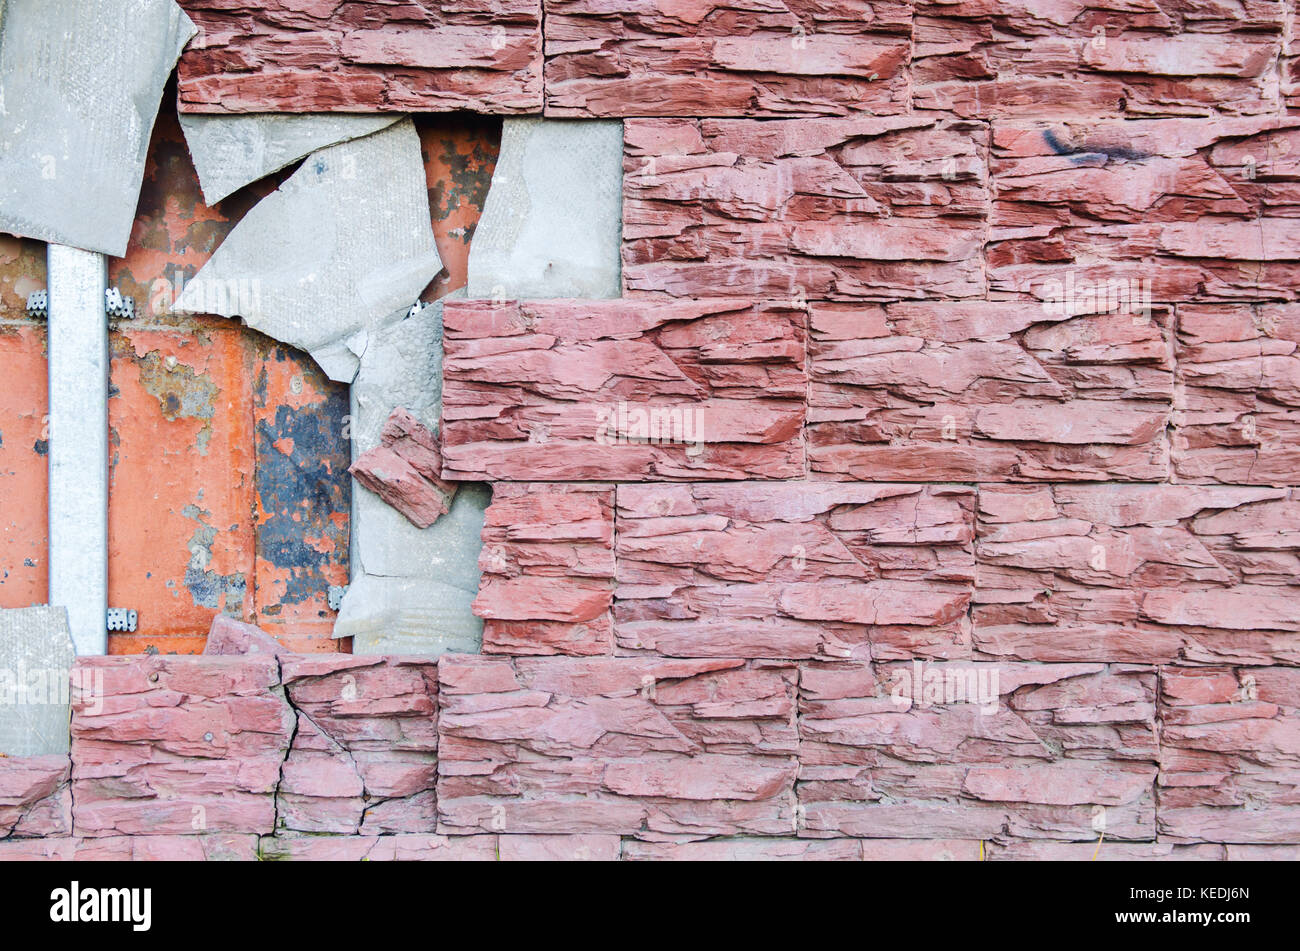 The broken tile on the tiled wall of the building requires repair Stock Photo